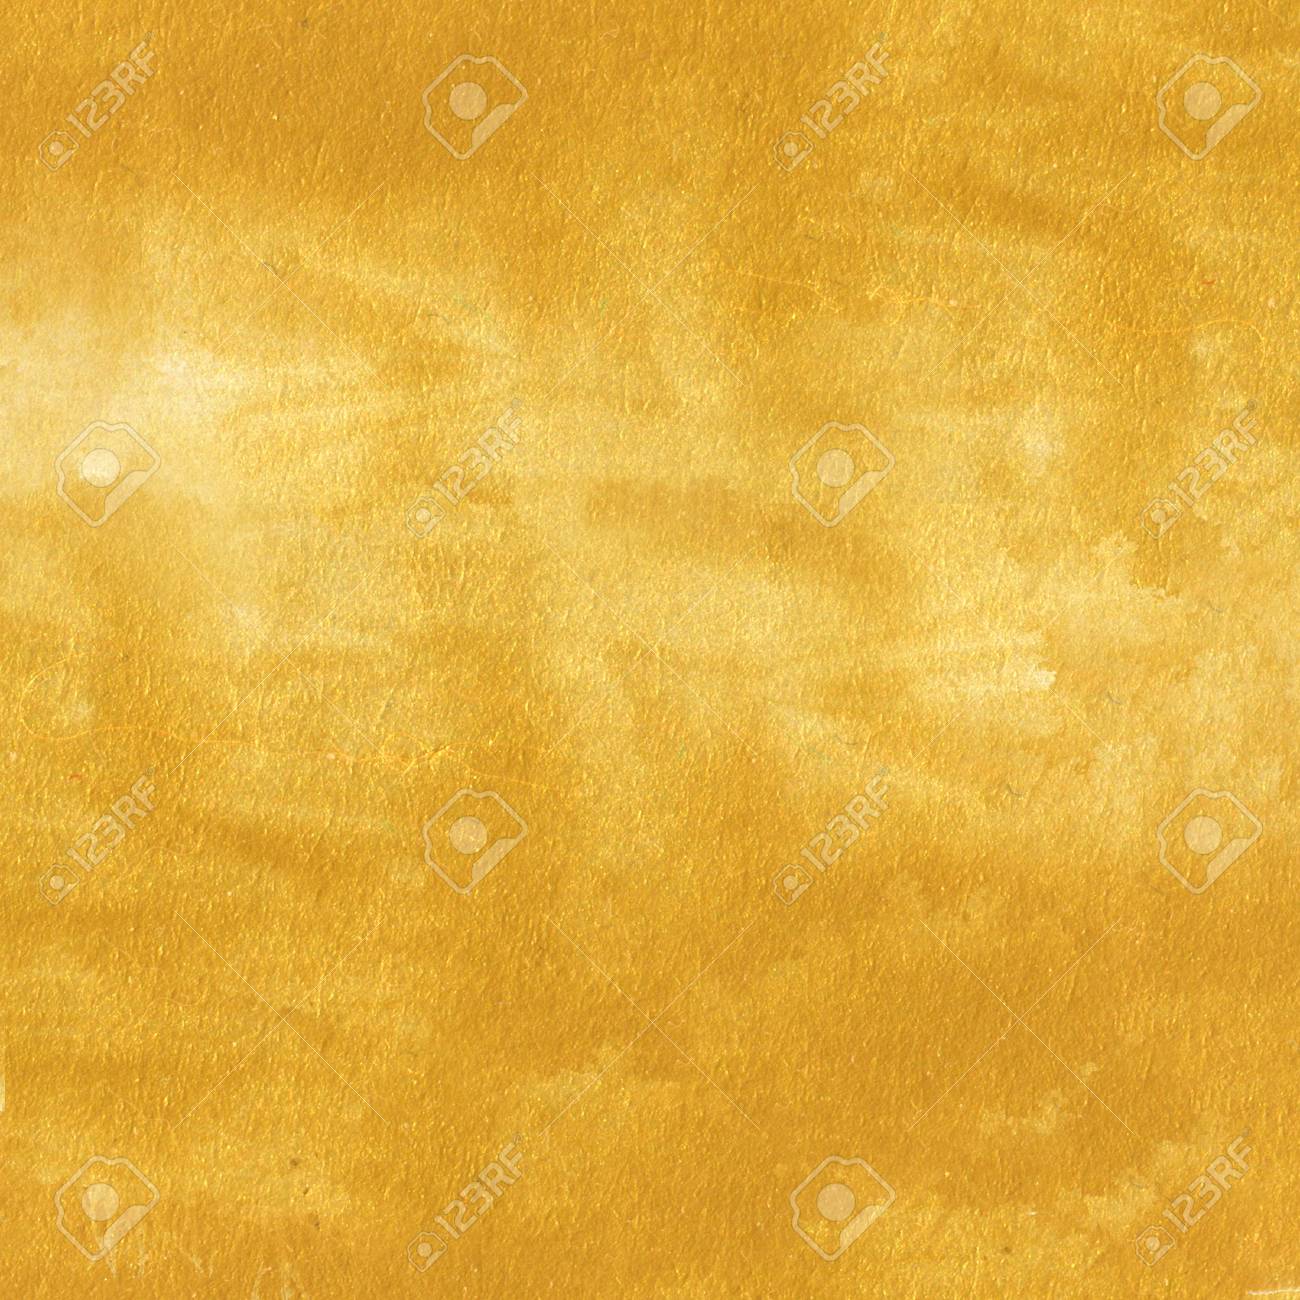 Golden Texture Hand Painted Gold Background Fill Stock Photo